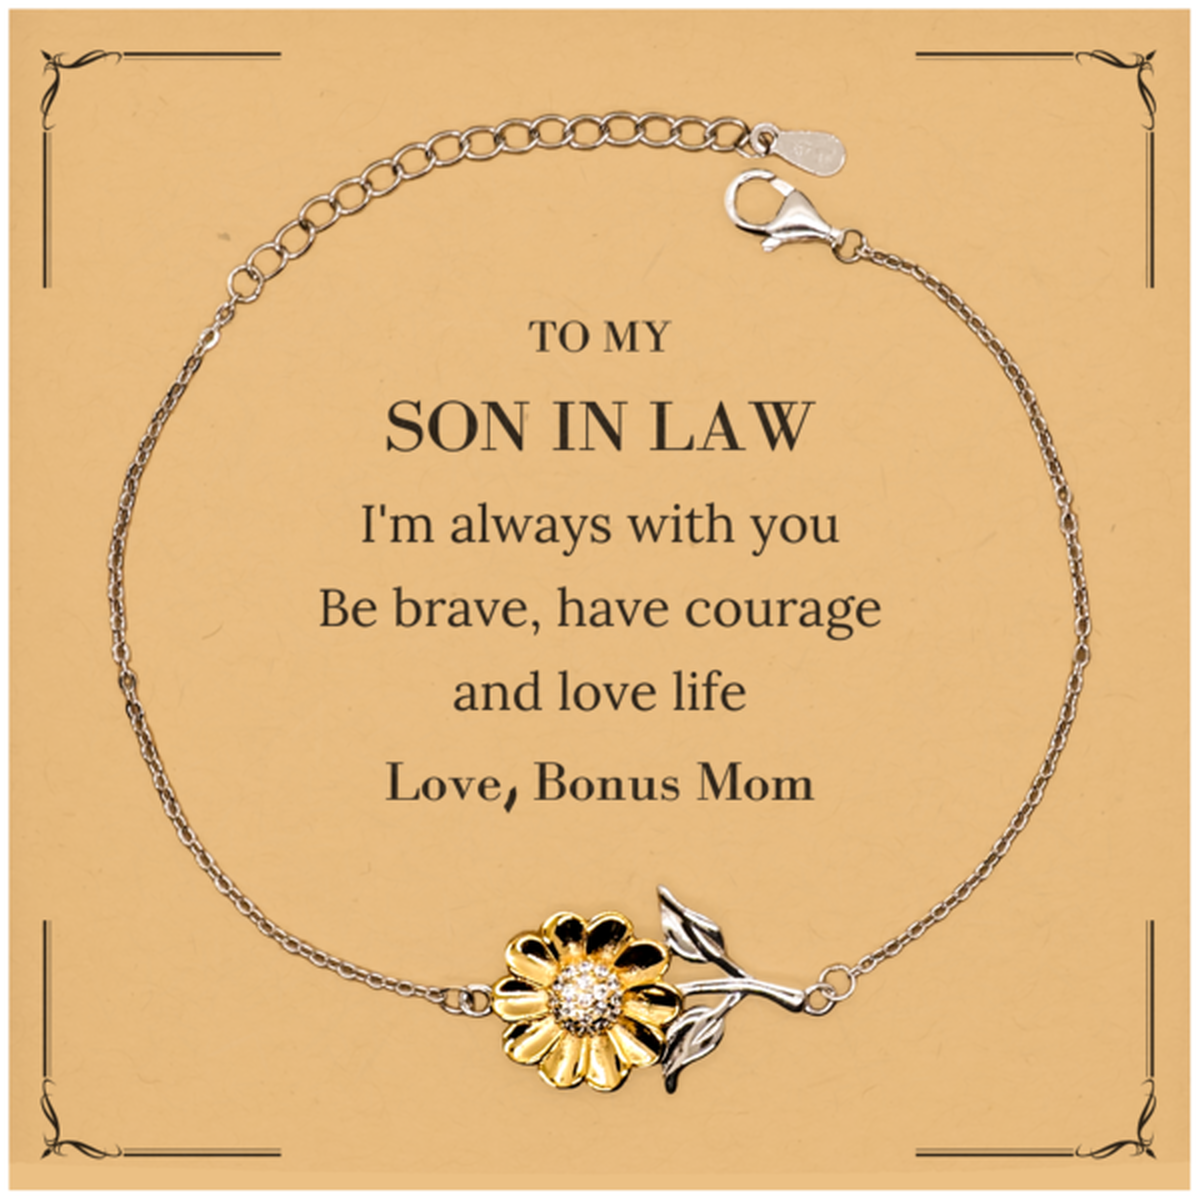 To My Son In Law Gifts from Bonus Mom, Unique Sunflower Bracelet Inspirational Christmas Birthday Graduation Gifts for Son In Law I'm always with you. Be brave, have courage and love life. Love, Bonus Mom